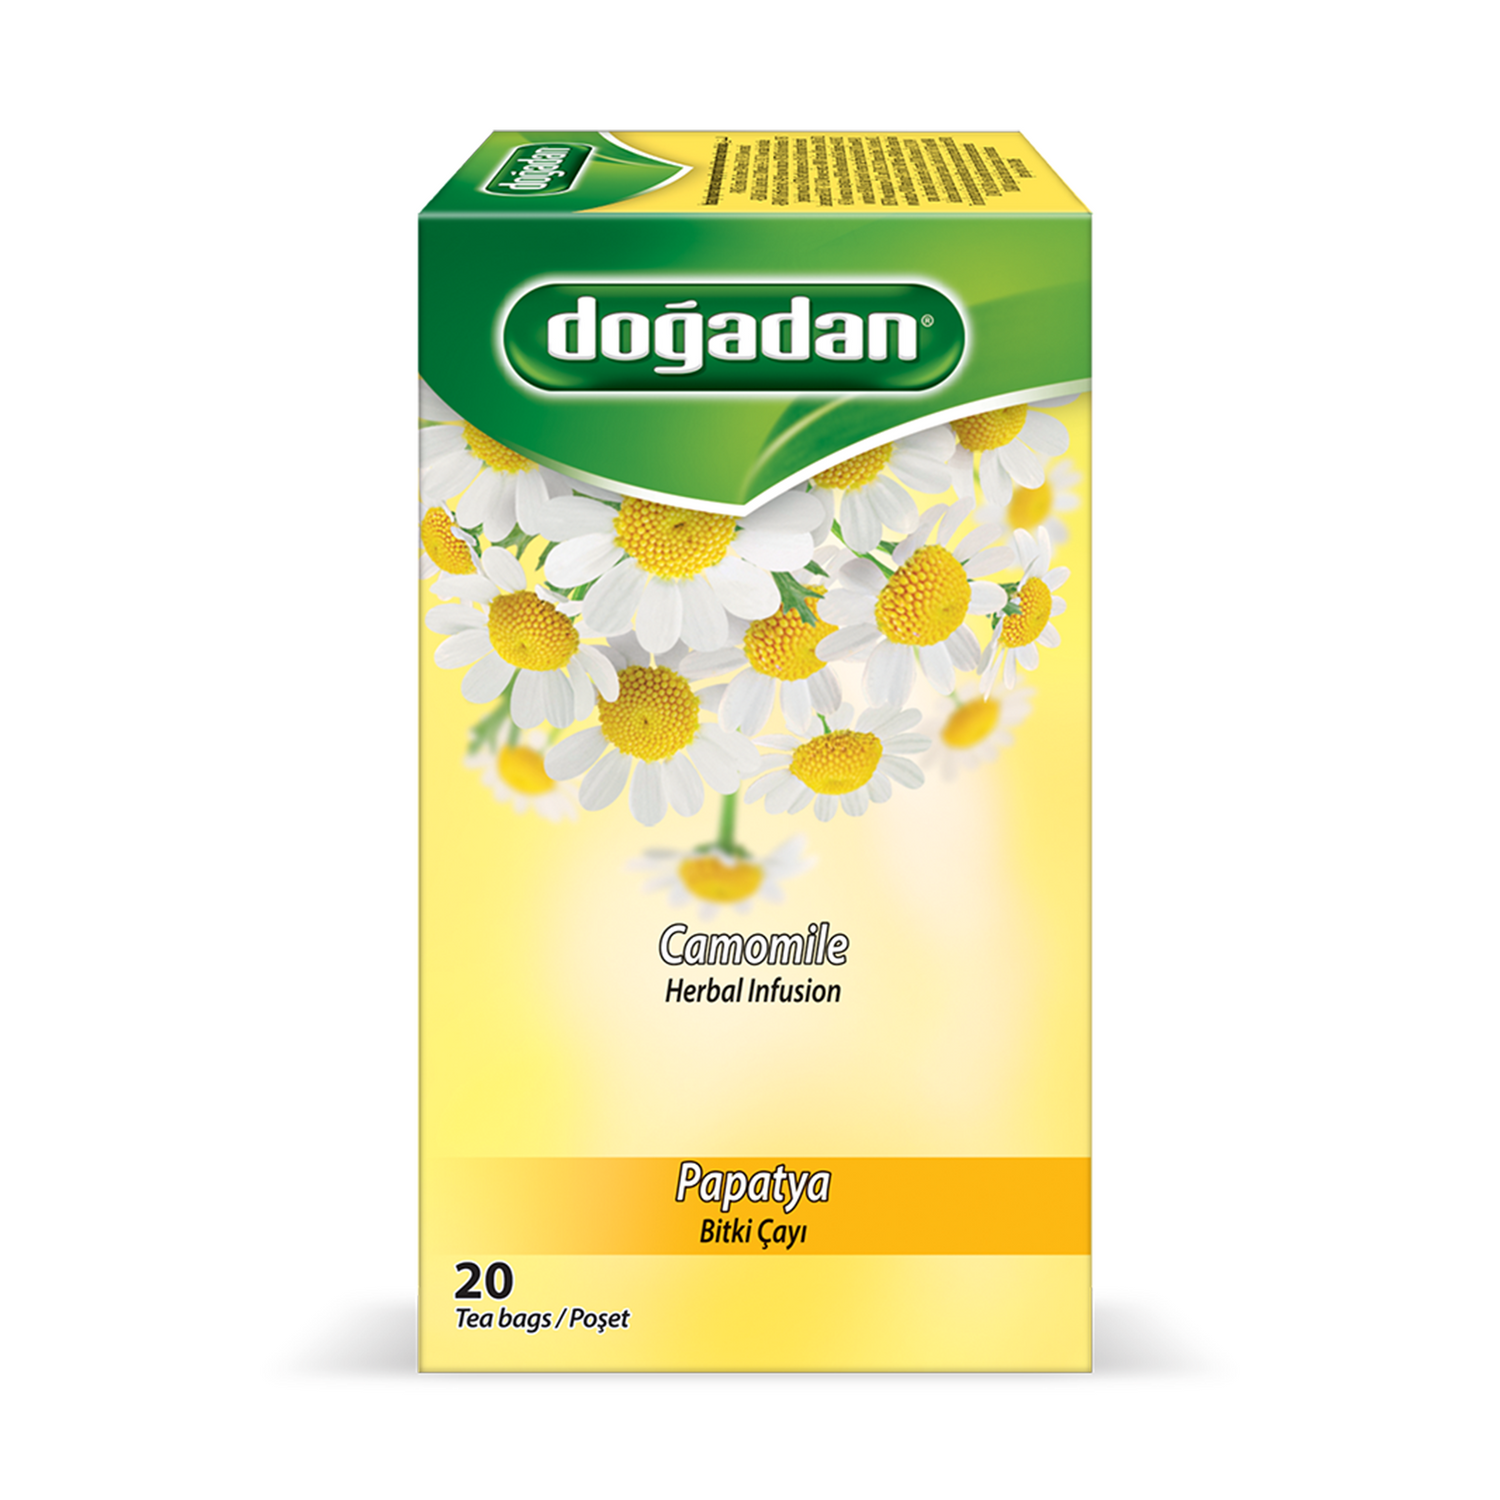 [Free Shipping] Dogal Support Package No.1: Dogadan 6 types of herbal tea + Turkish tea